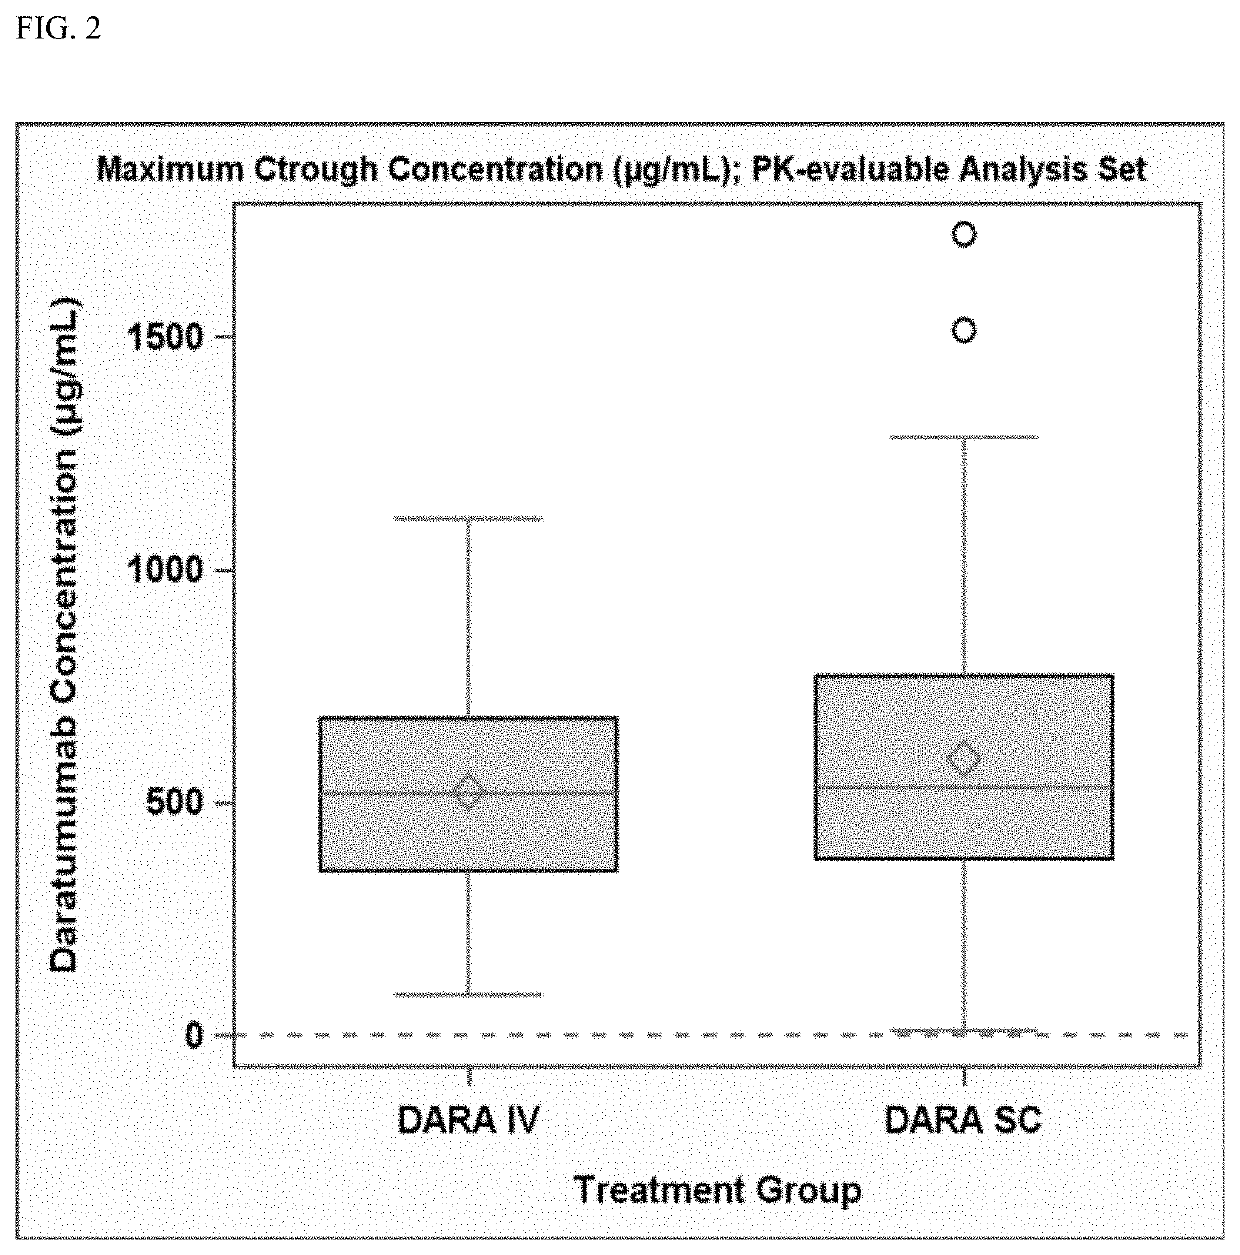 Clinically Proven Subcutaneous Pharmaceutical Compositions Comprising Anti-CD38 Antibodies and Their Uses in Combination with Lenalidomide and Dexamethasone